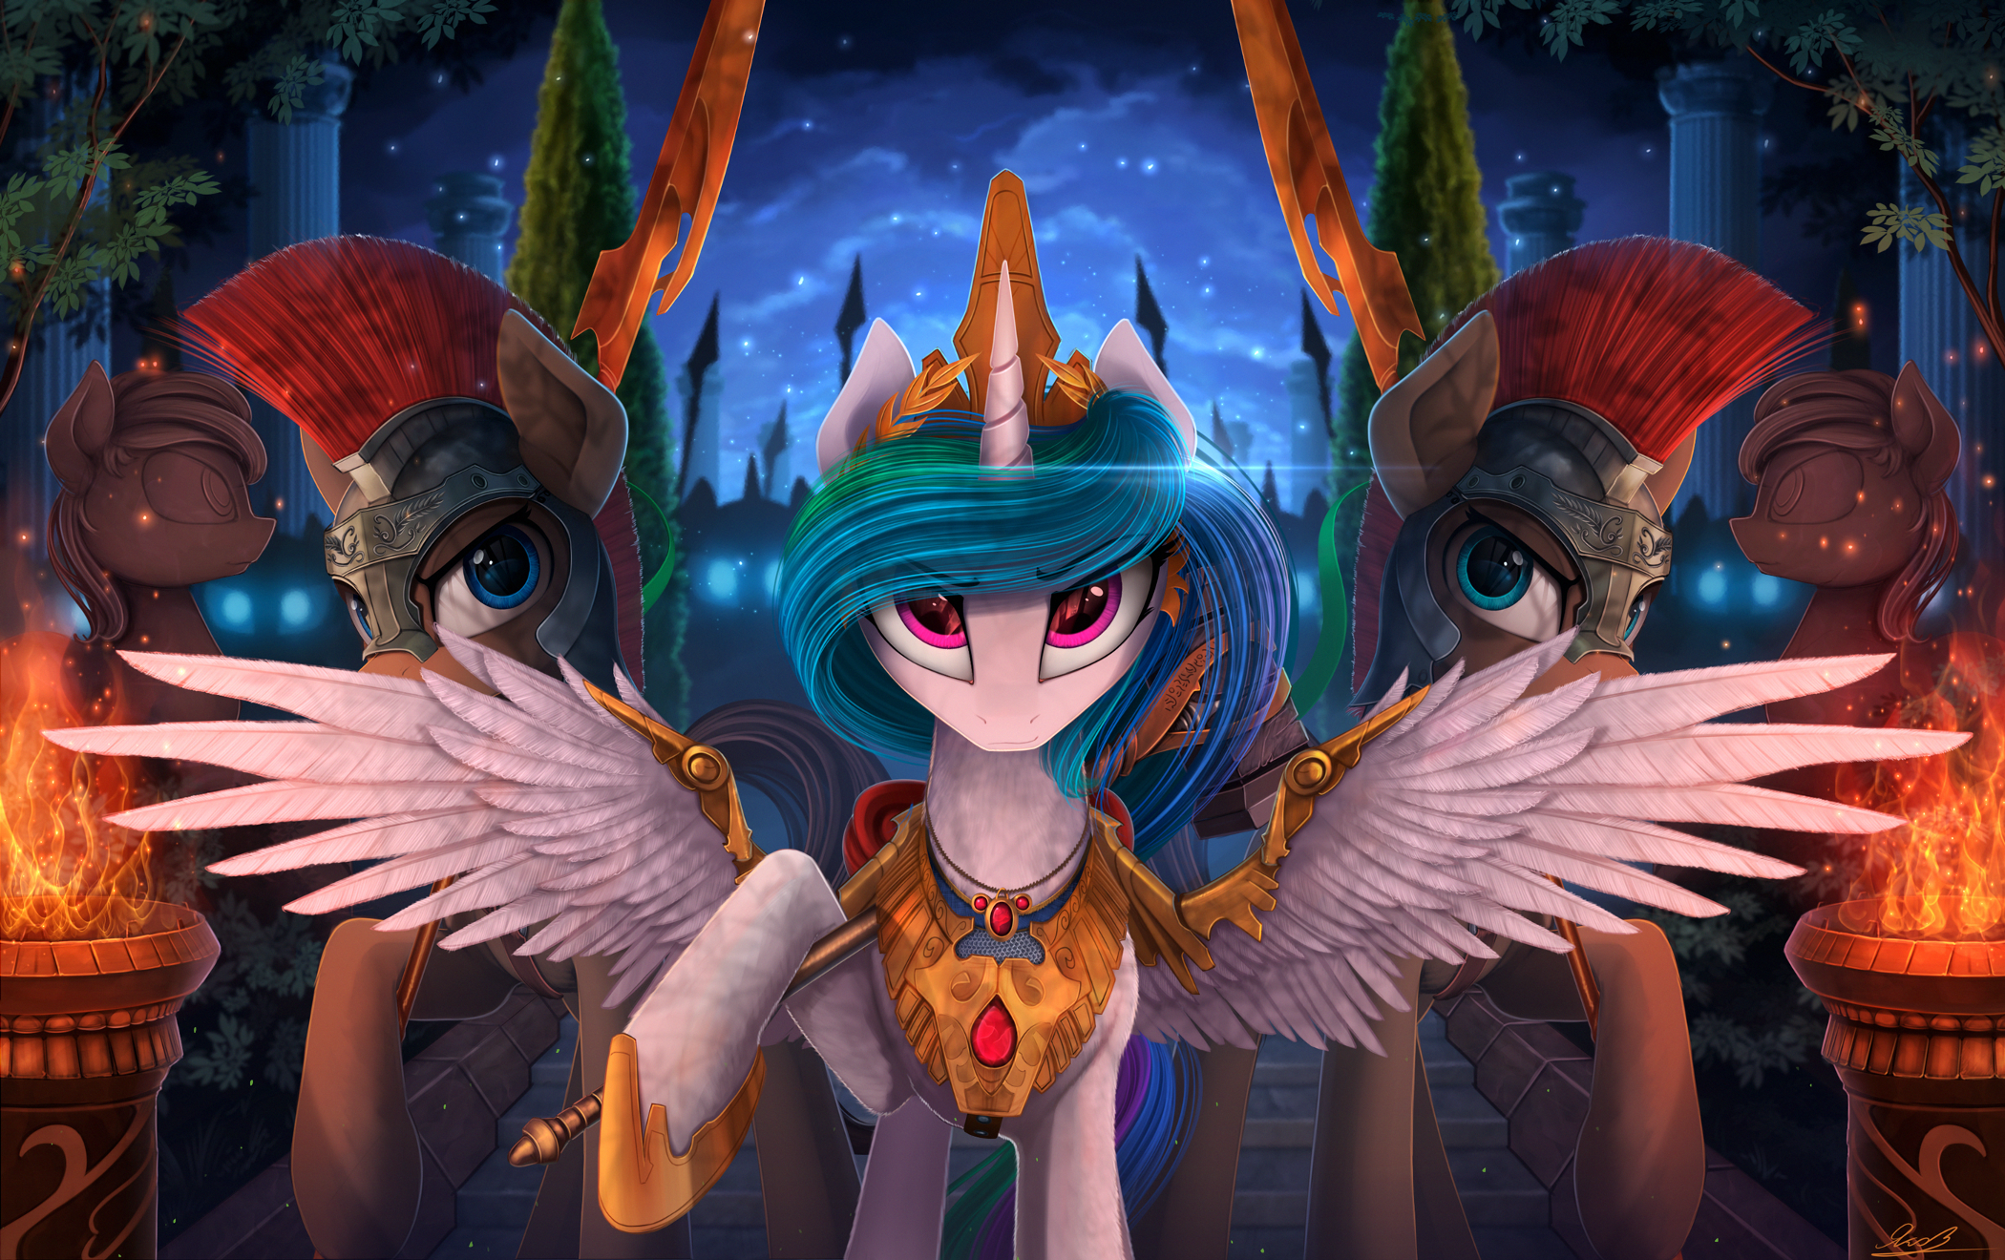 Princess celestia hd papers and backgrounds